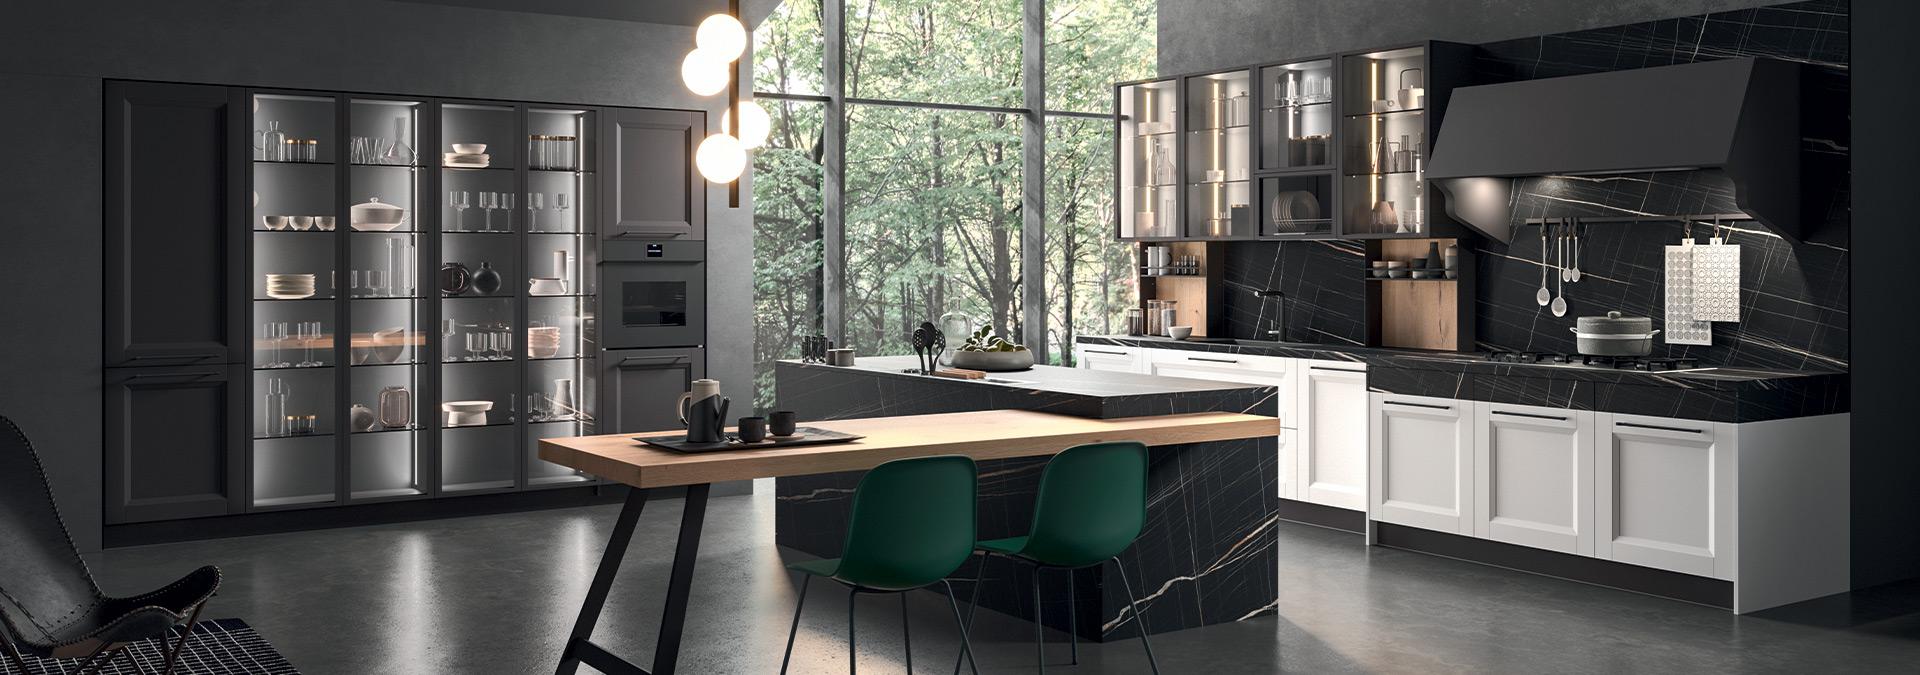 EGO, THE KITCHEN FOR AN ALWAYS CURRENT URBAN STYLE